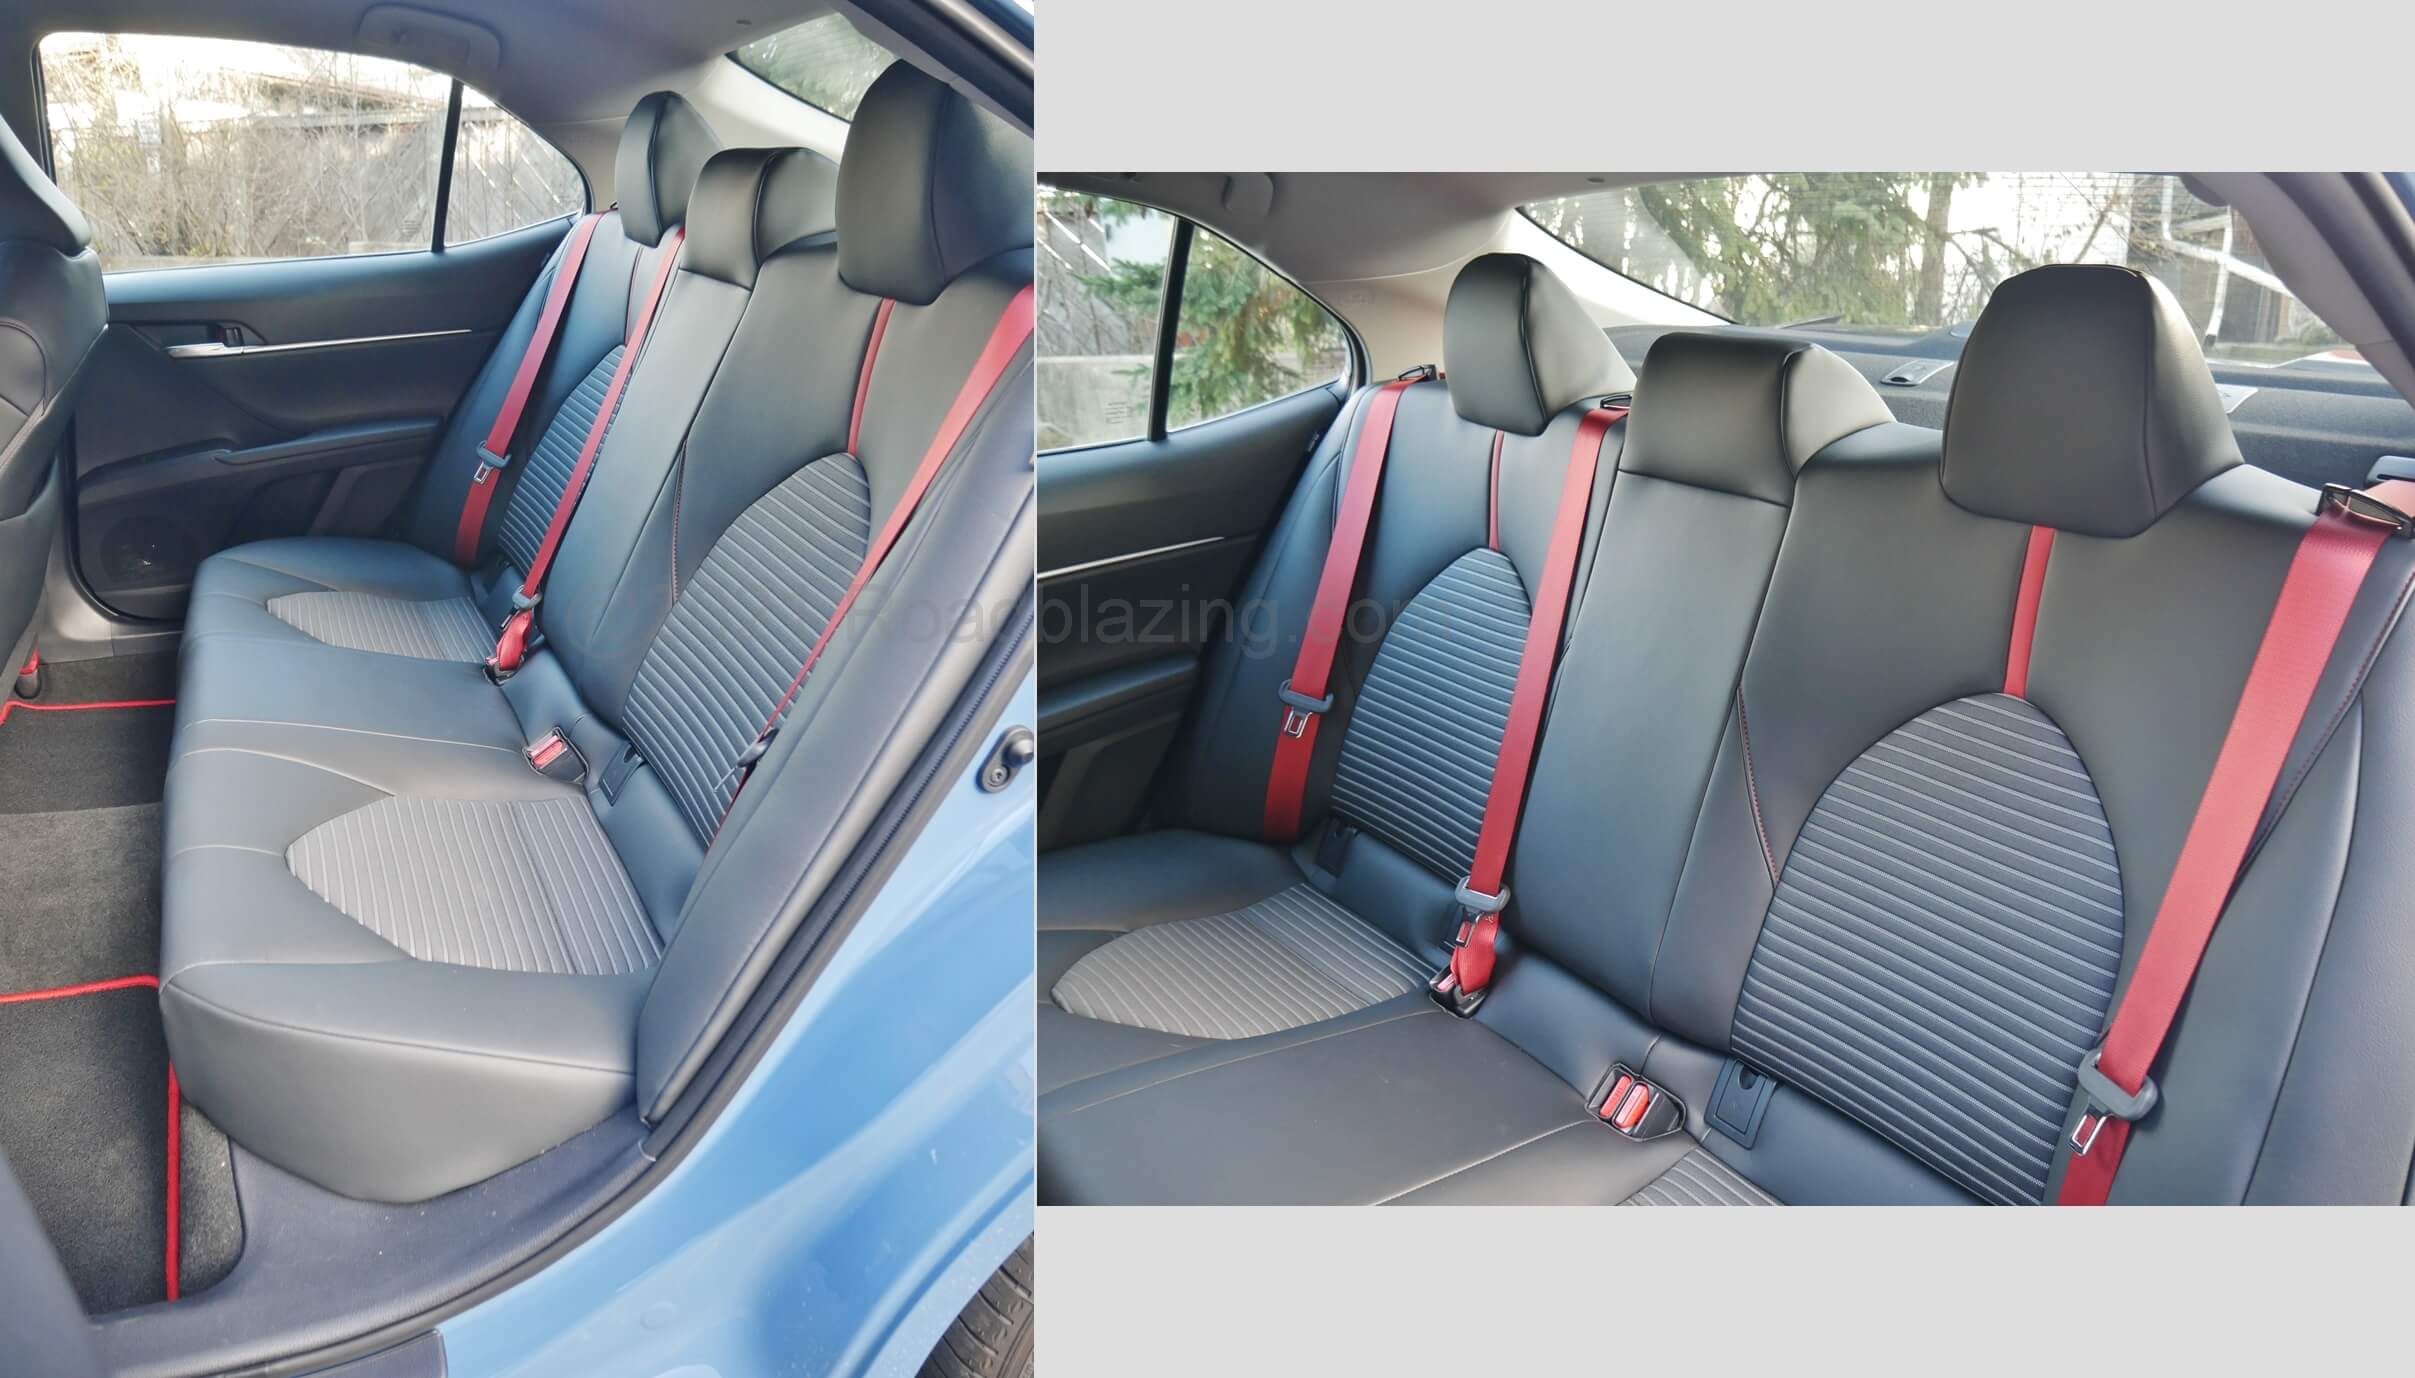 2022 Toyota Camry TRD: red seat belts persist in Row 2, while center armrest and pass through are missing